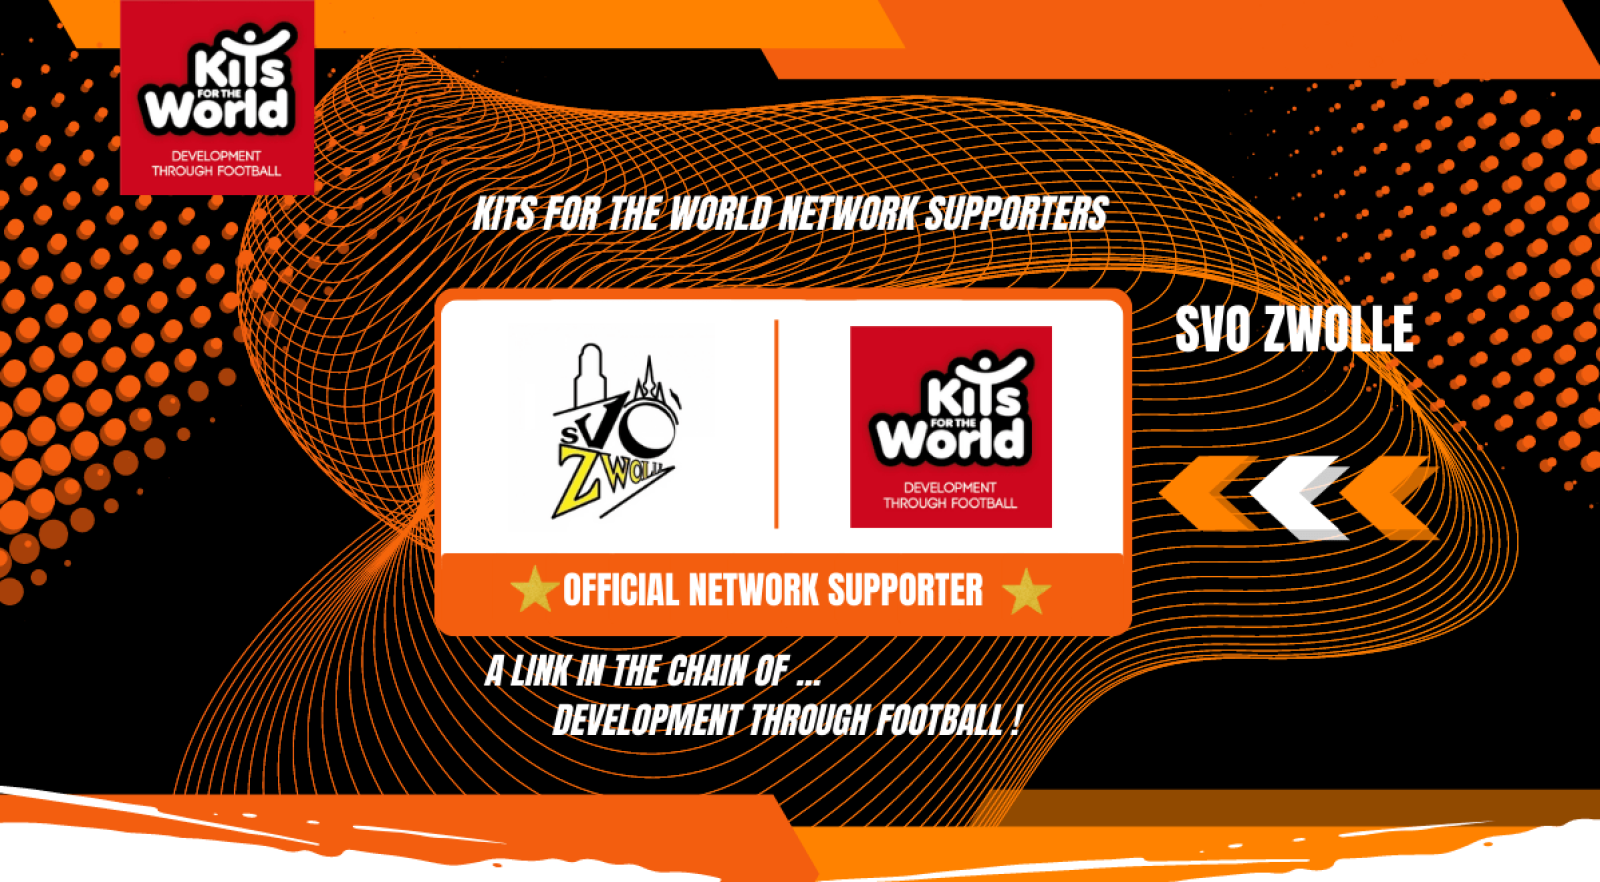 svo zwolle _official NETWORK SUPPORTER _Kits for the World